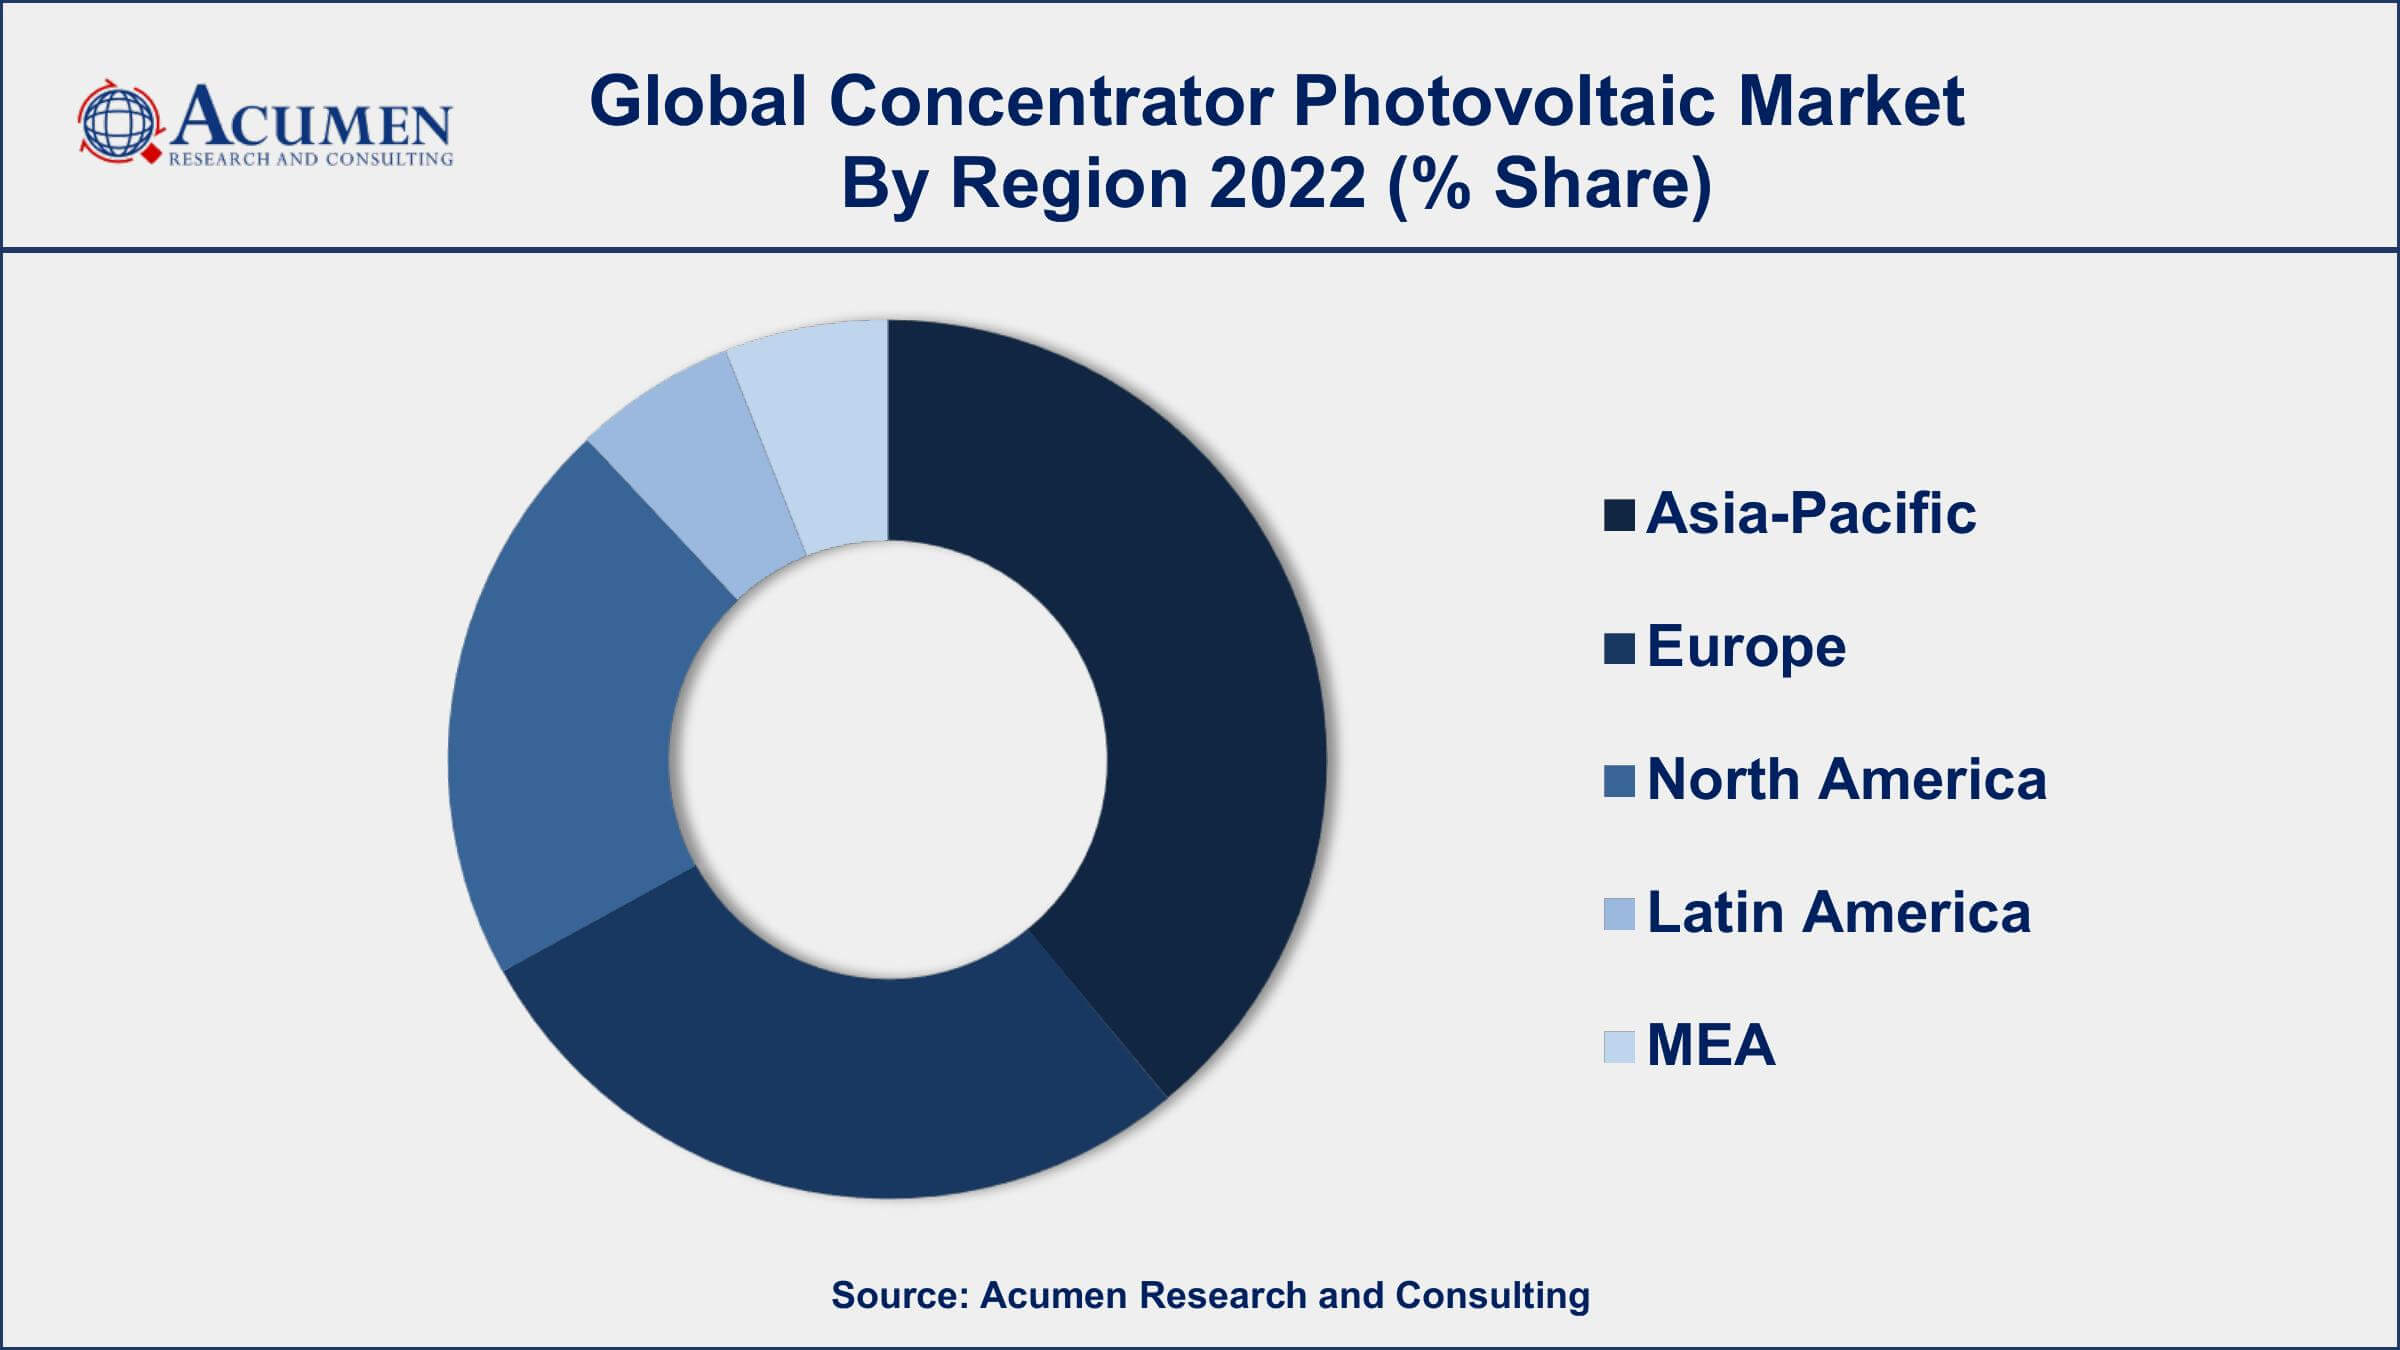 Concentrator Photovoltaic Market Drivers